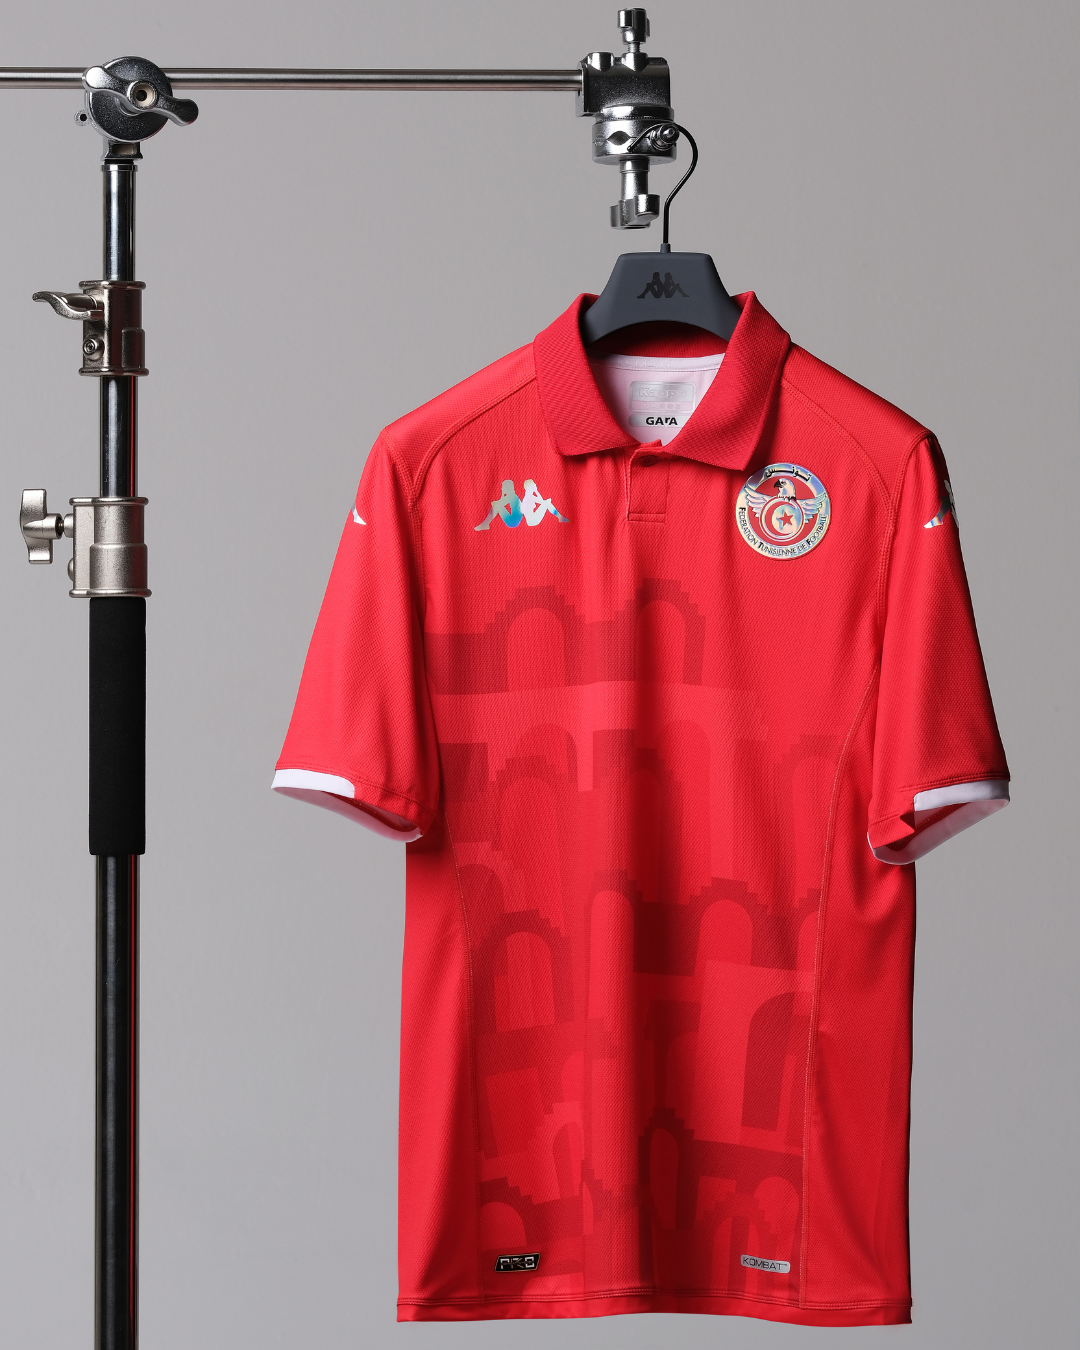 Tunisia's new jerseys for the African Cup of Nations Made by Kappa with graphics inspired by the El Jem amphitheater